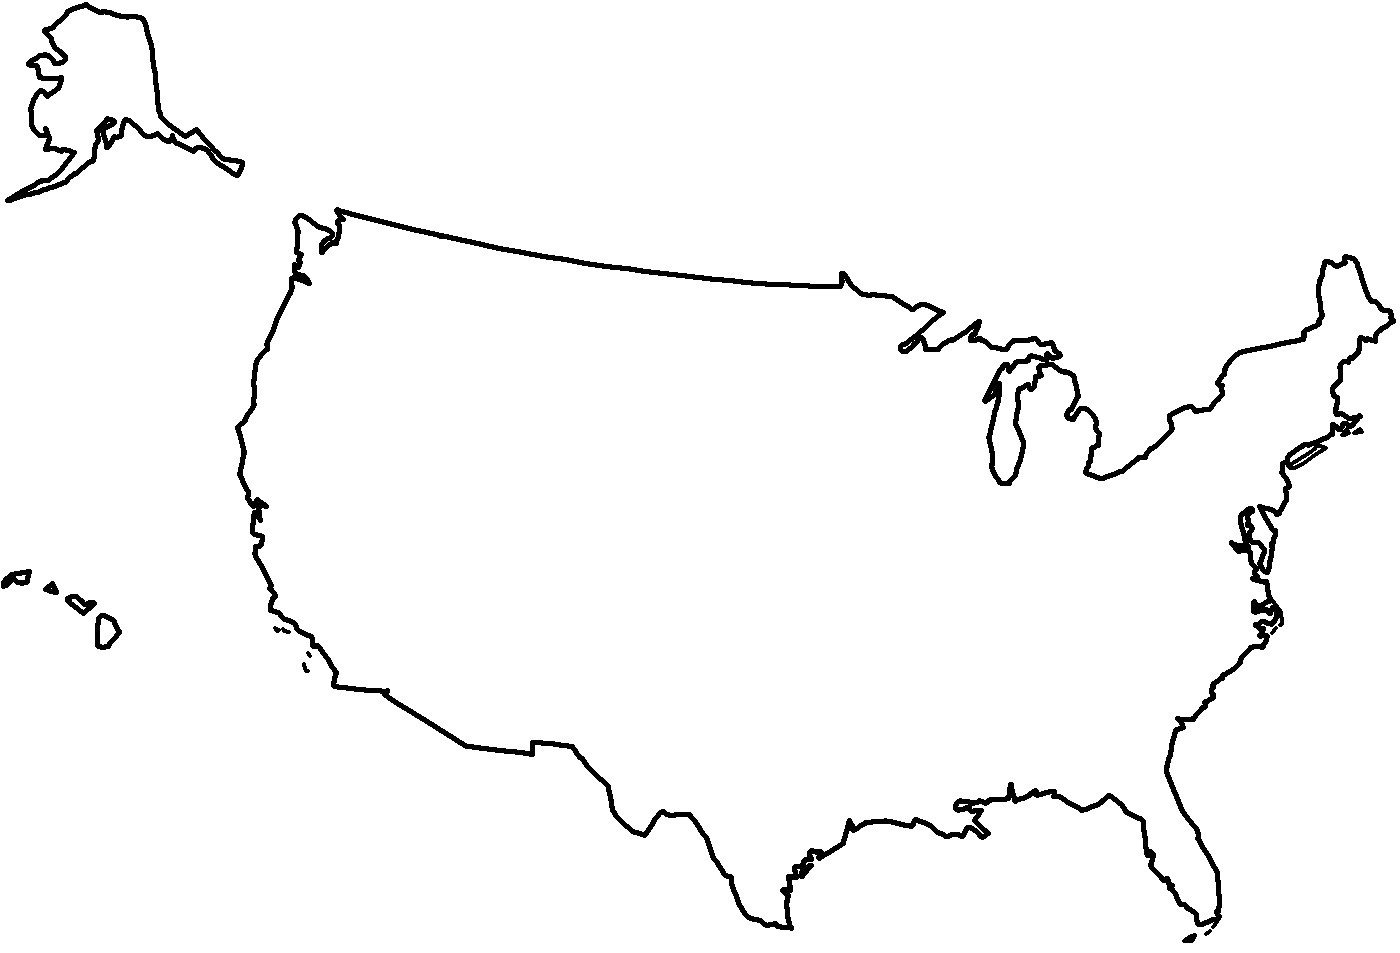 Clipart Of United States Map Outline Us #83471.